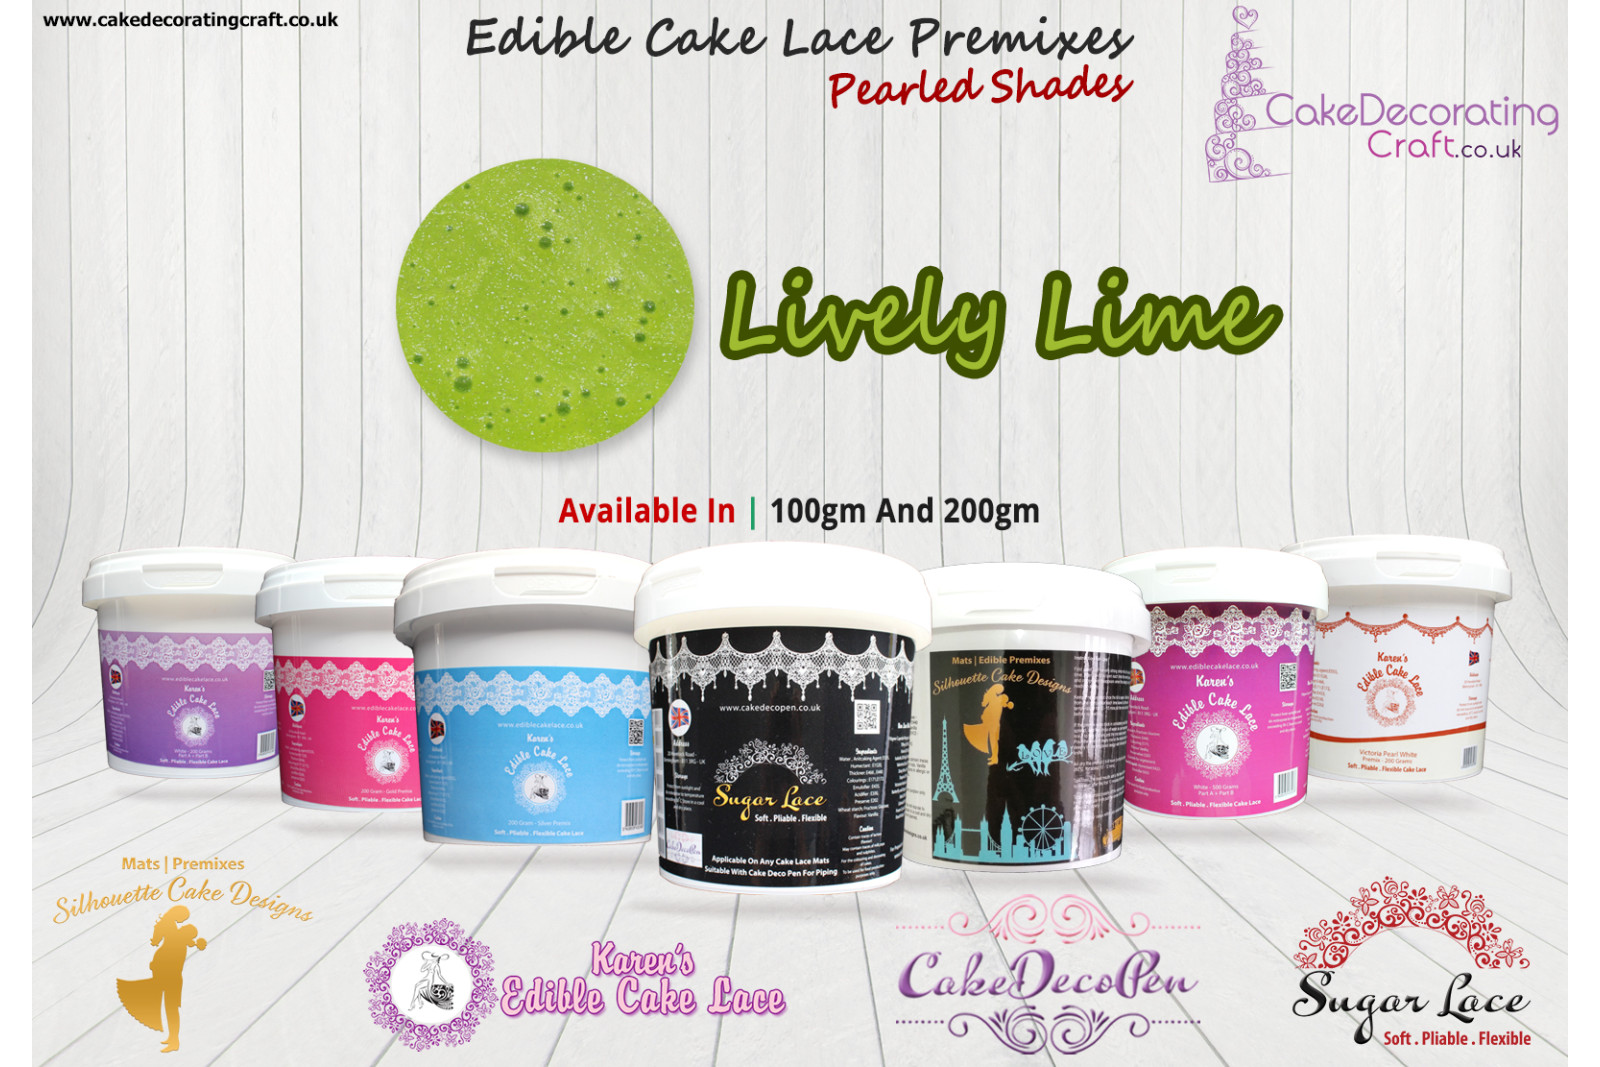 Lively Lime Colour | Silhouette Cake Design Premixes | Pearled Shade | 200 Grams